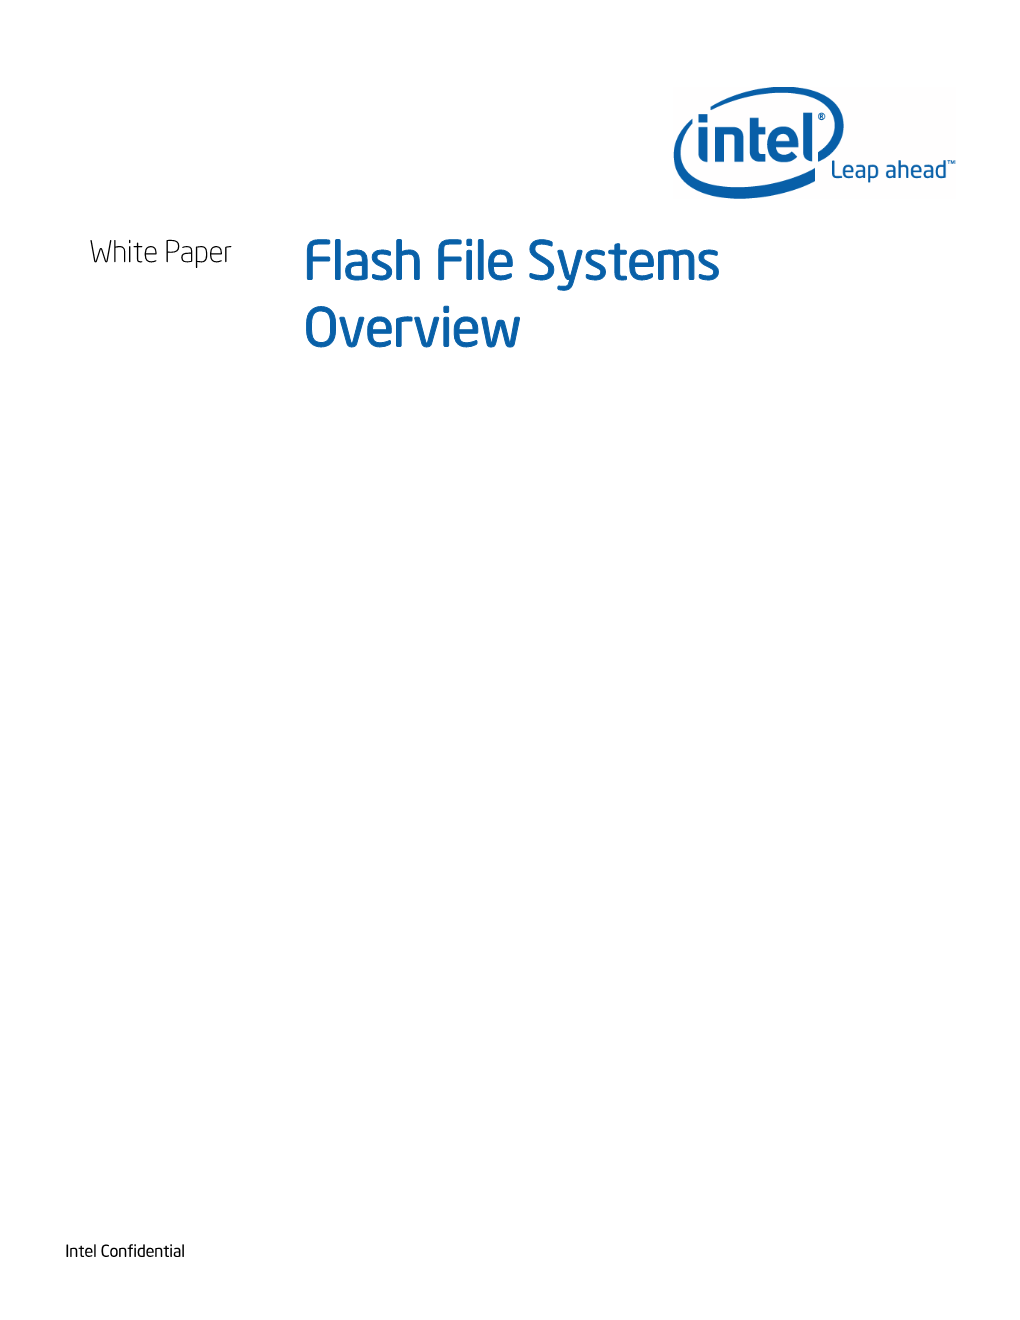 Flash File Systems Overview